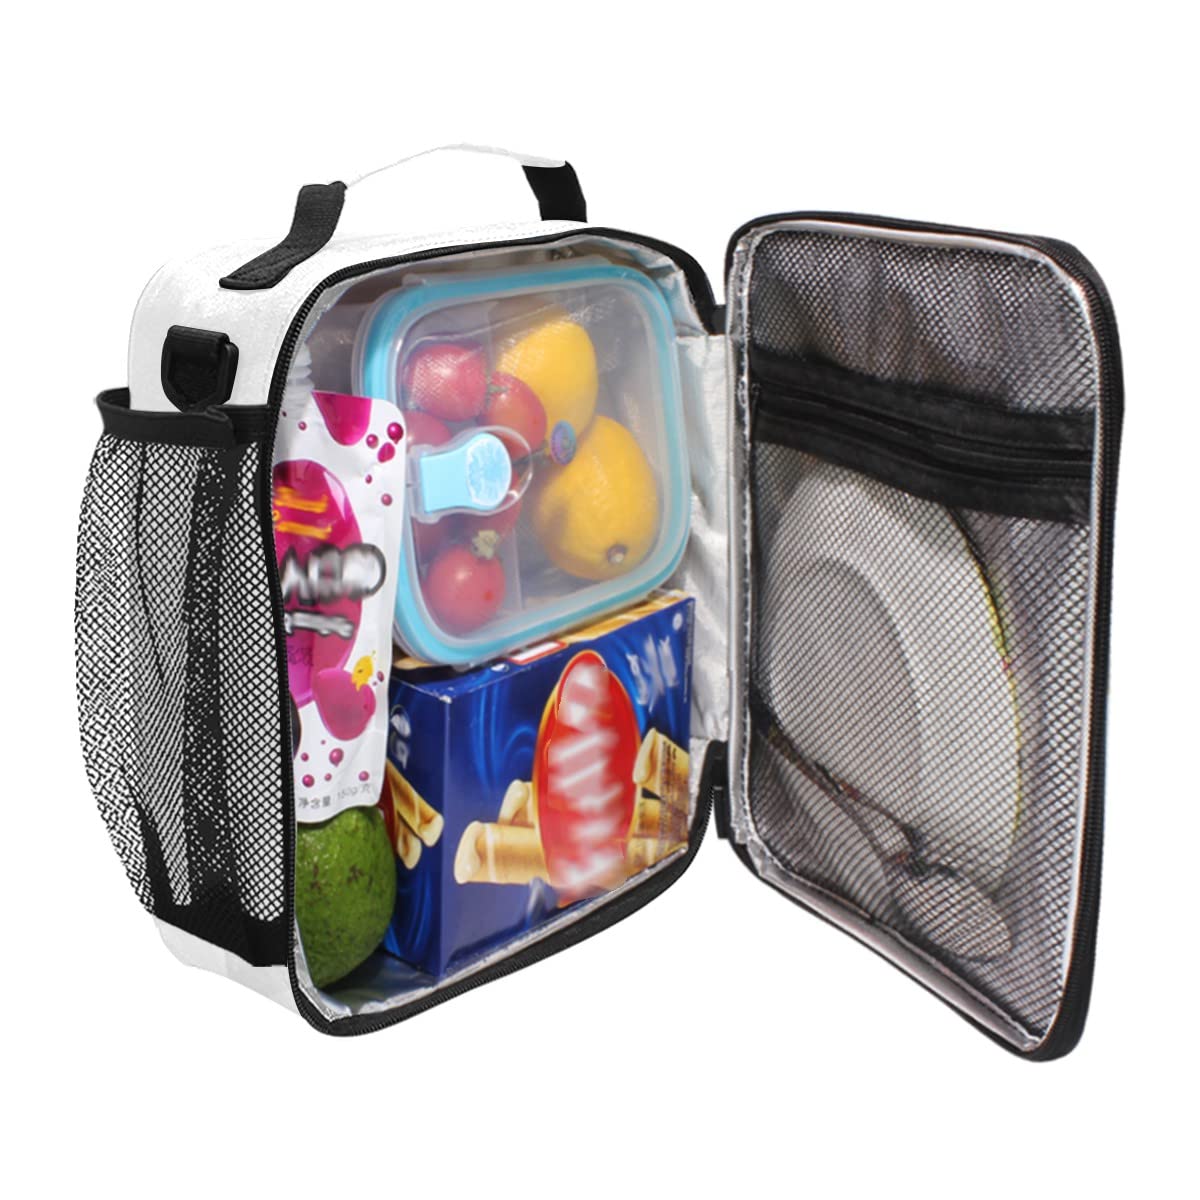 Nander Cartoon Panda Bamboo Lunch Box for Girls Mens Kids Thermal Insulation Lunch Tote Bag with Shoulder Strap for Work